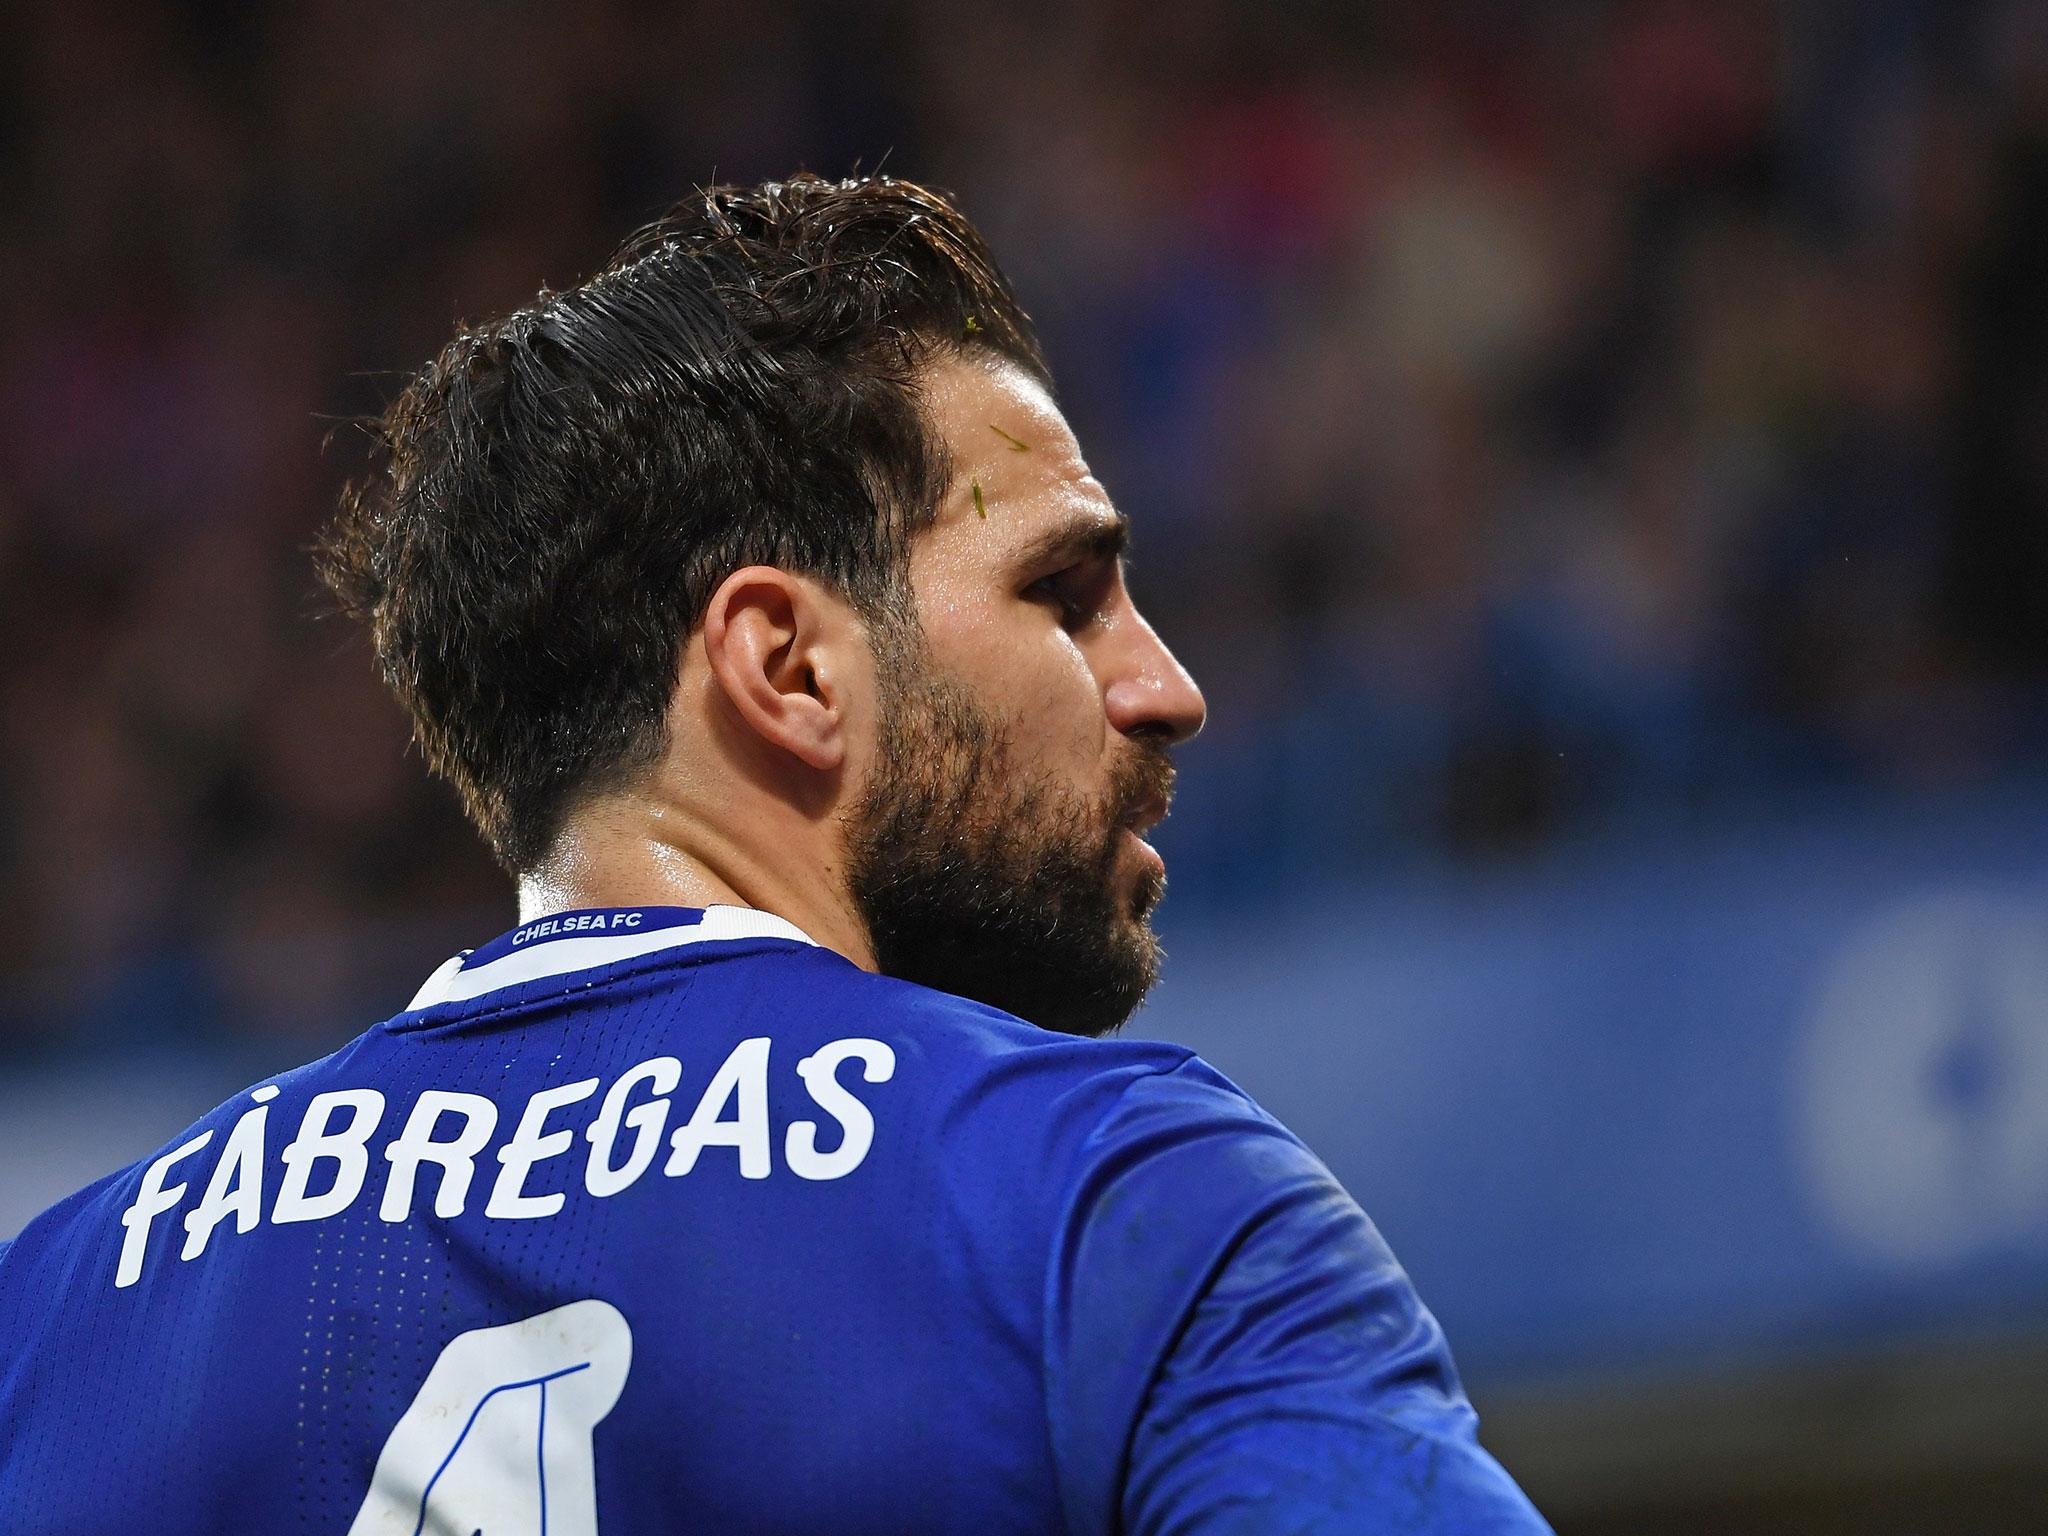 Yet unlike Pirlo, Fabregas has been restricted to mainly substitute appearances this season